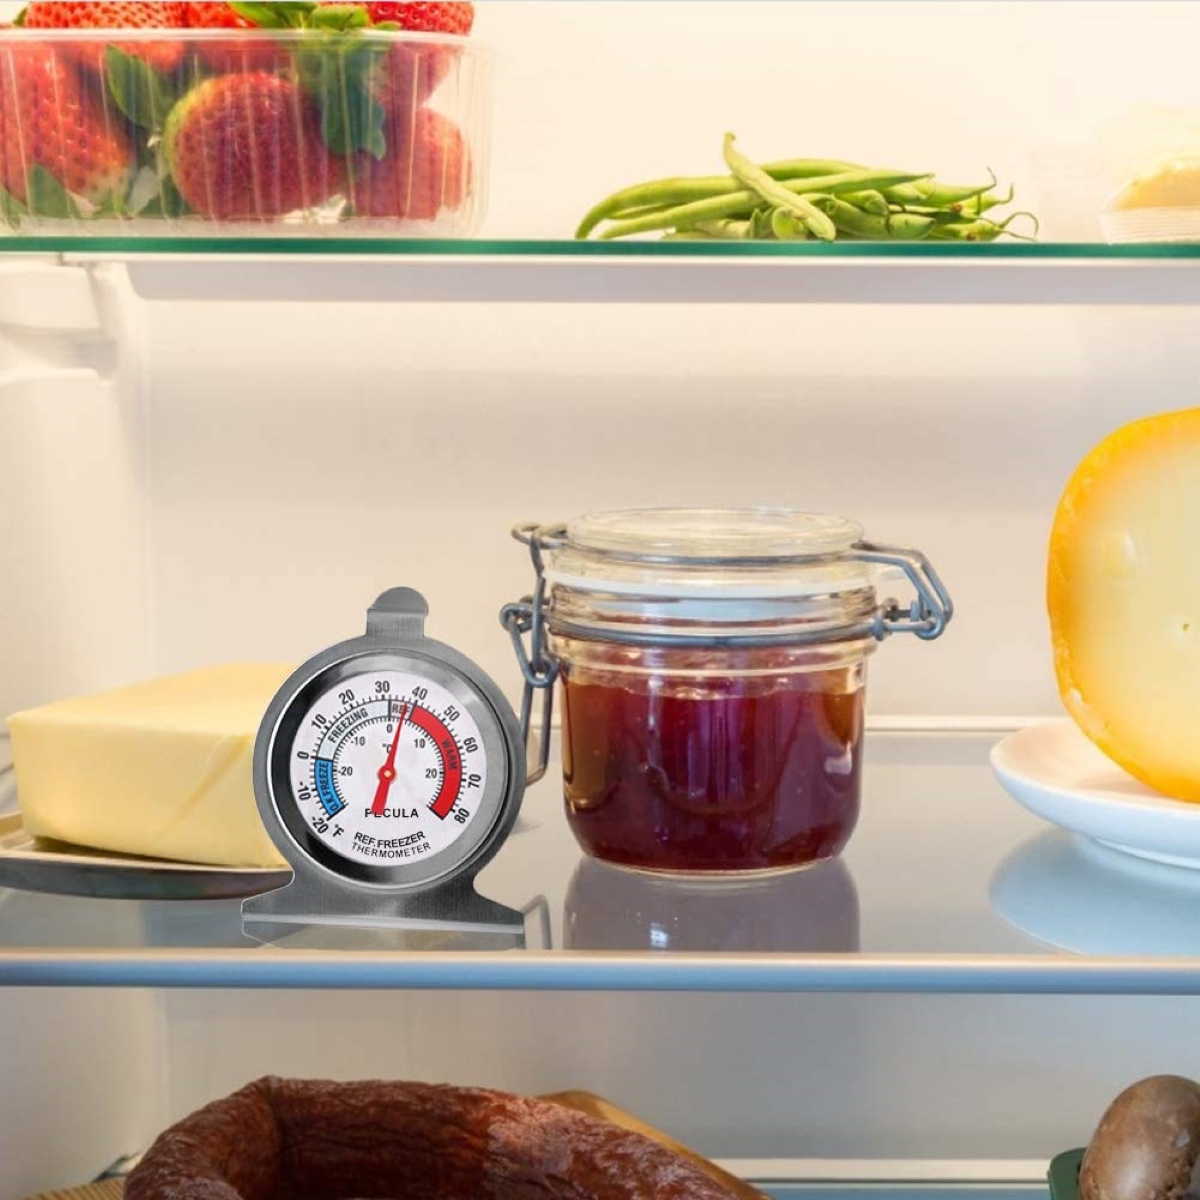 Thermometer in fridge